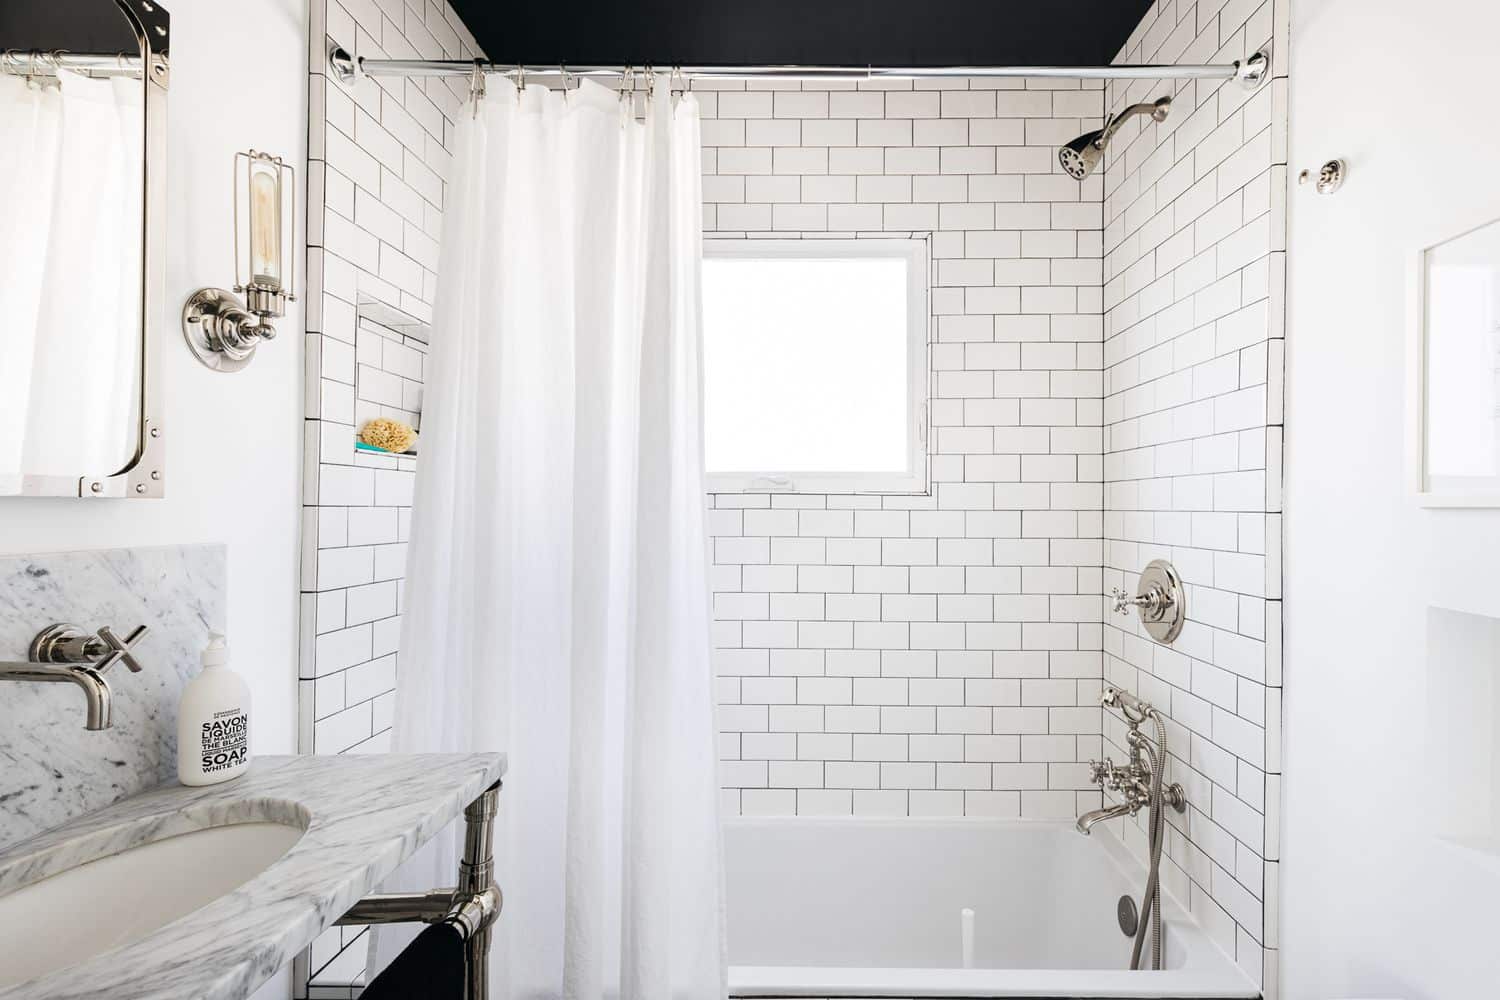 Feel Like Your Bathroom is Too Small? Tips to Maximize the Space